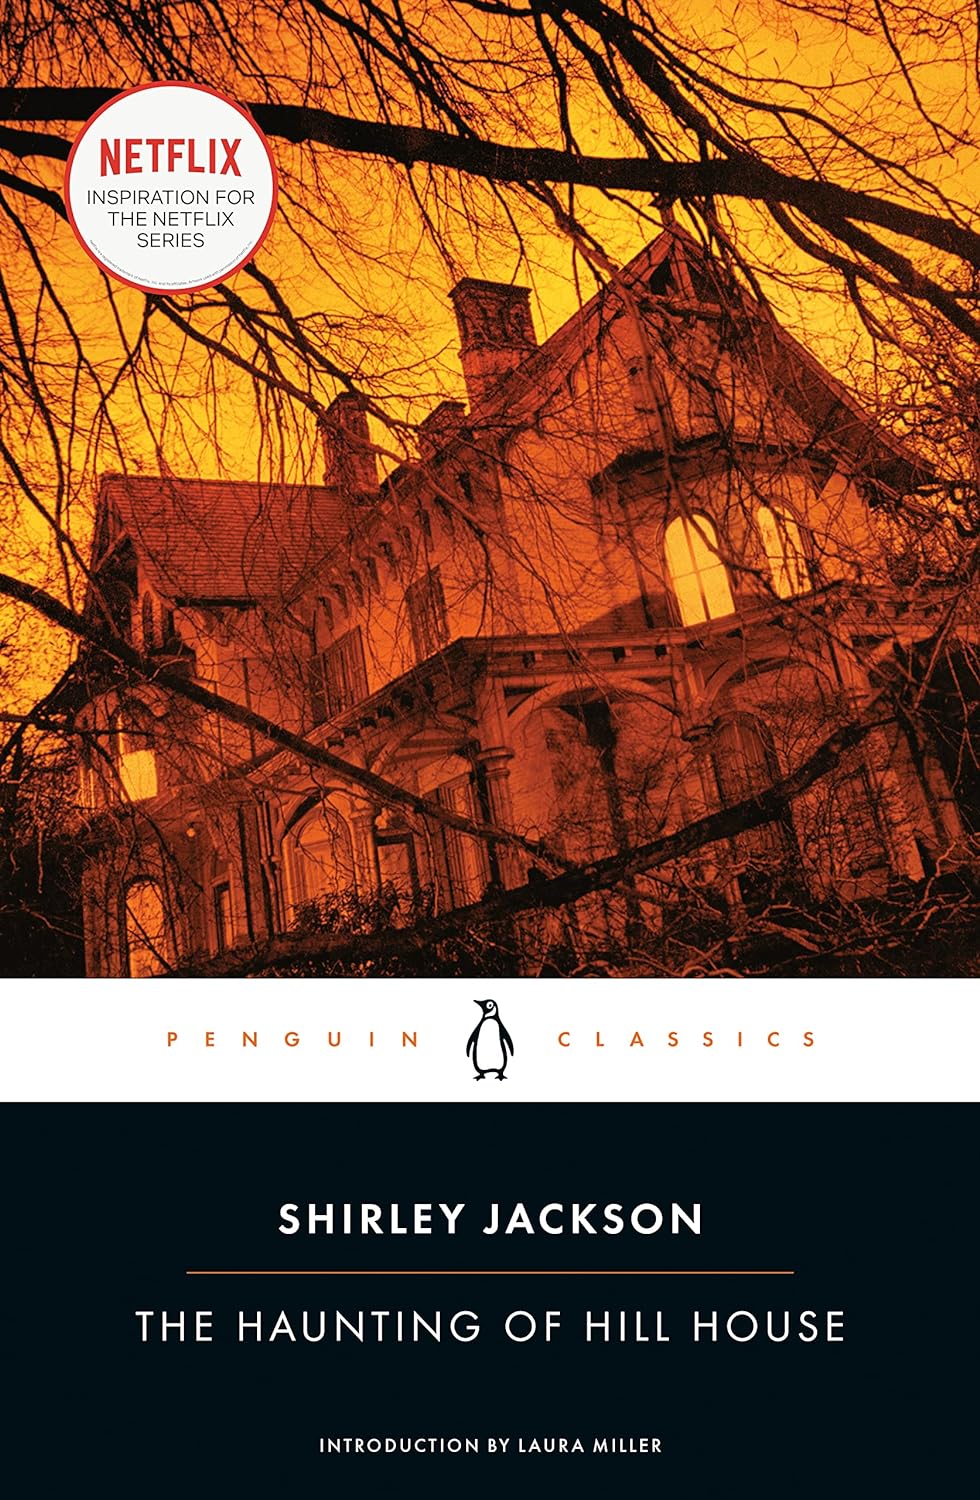 Shirley Jackson: The Haunting of Hill House (2006, Penguin Books)